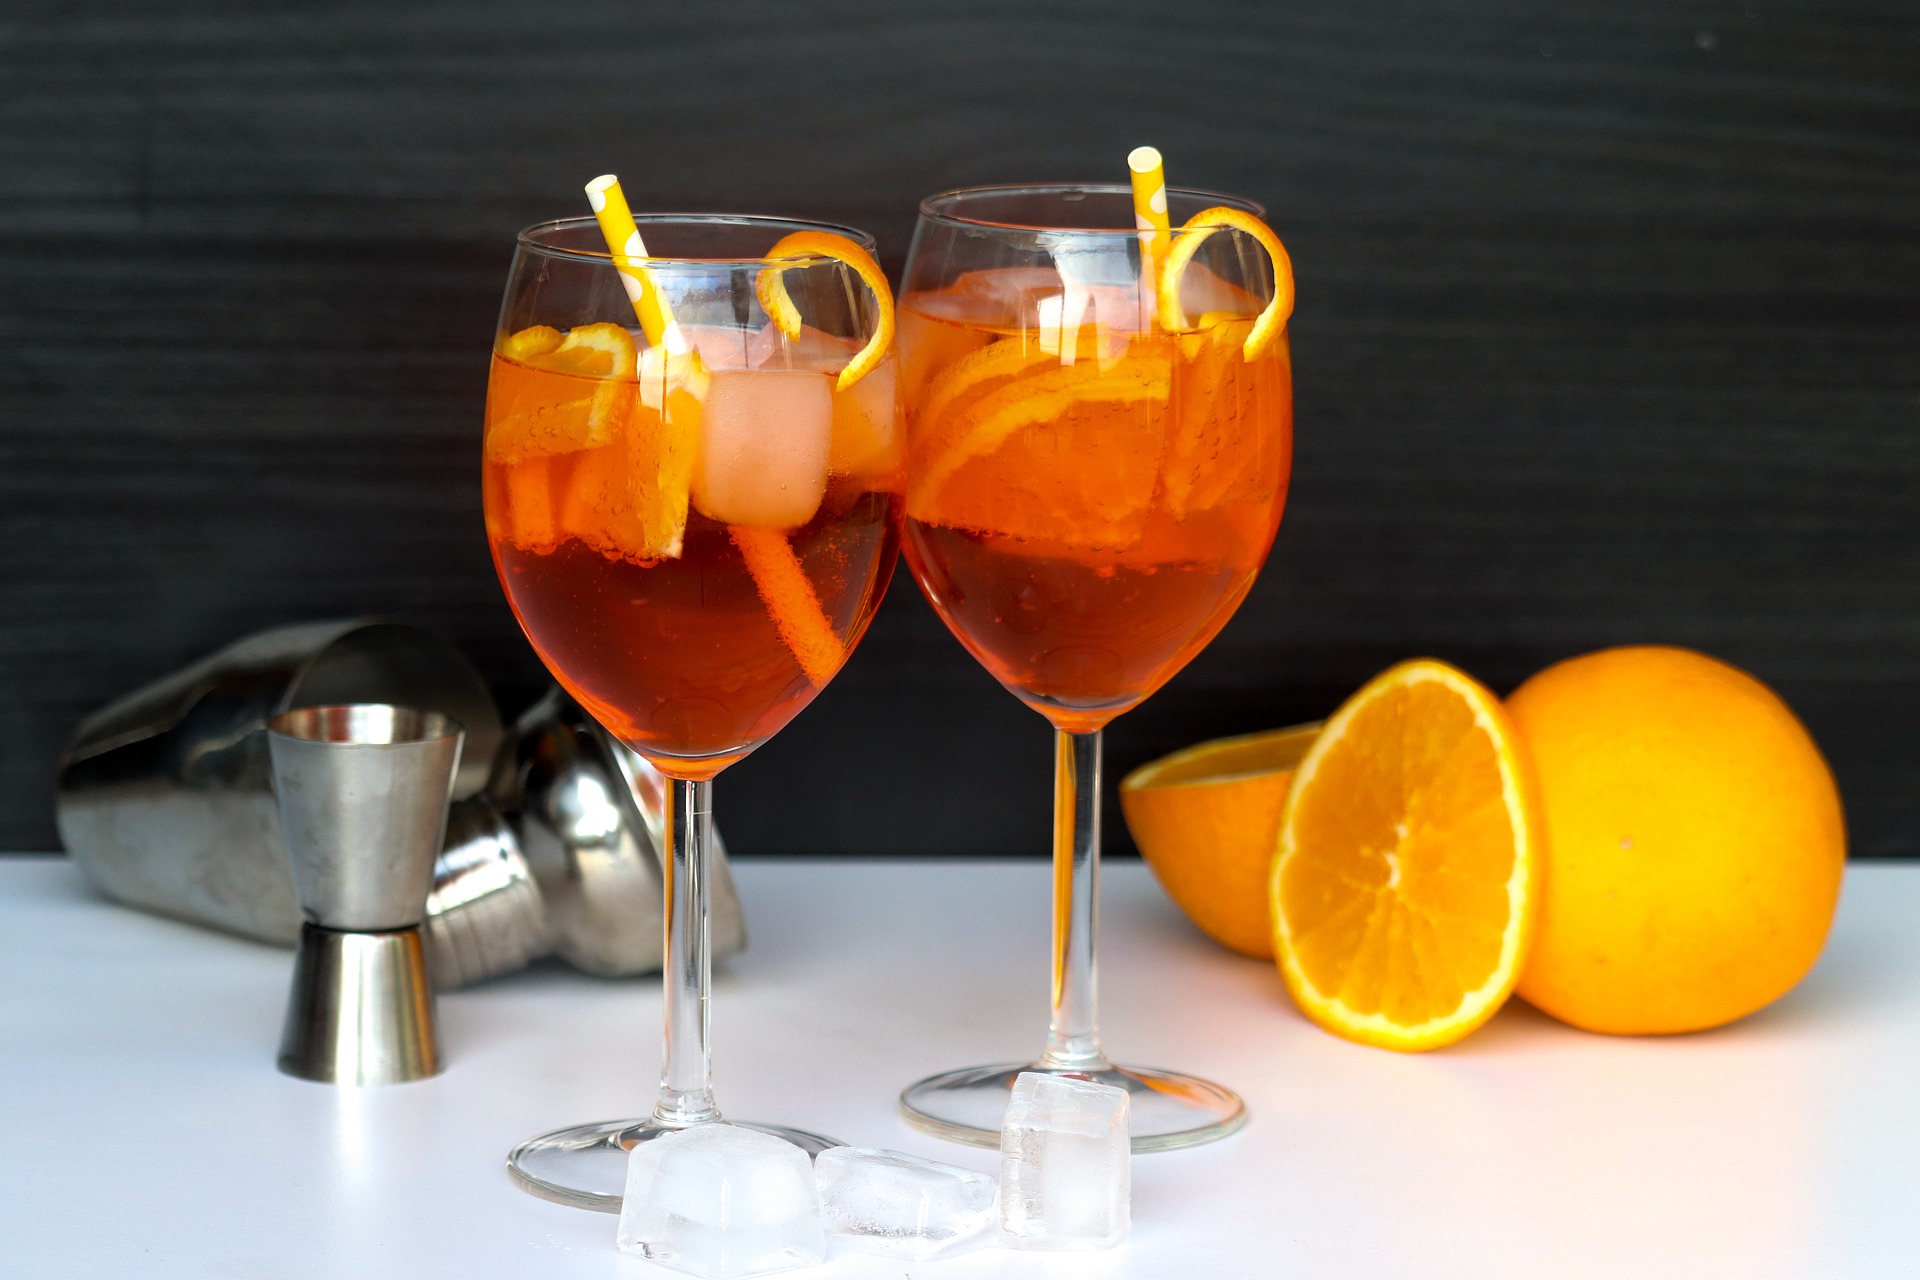 Alpine feeling at home with a Aperol Sprtiz